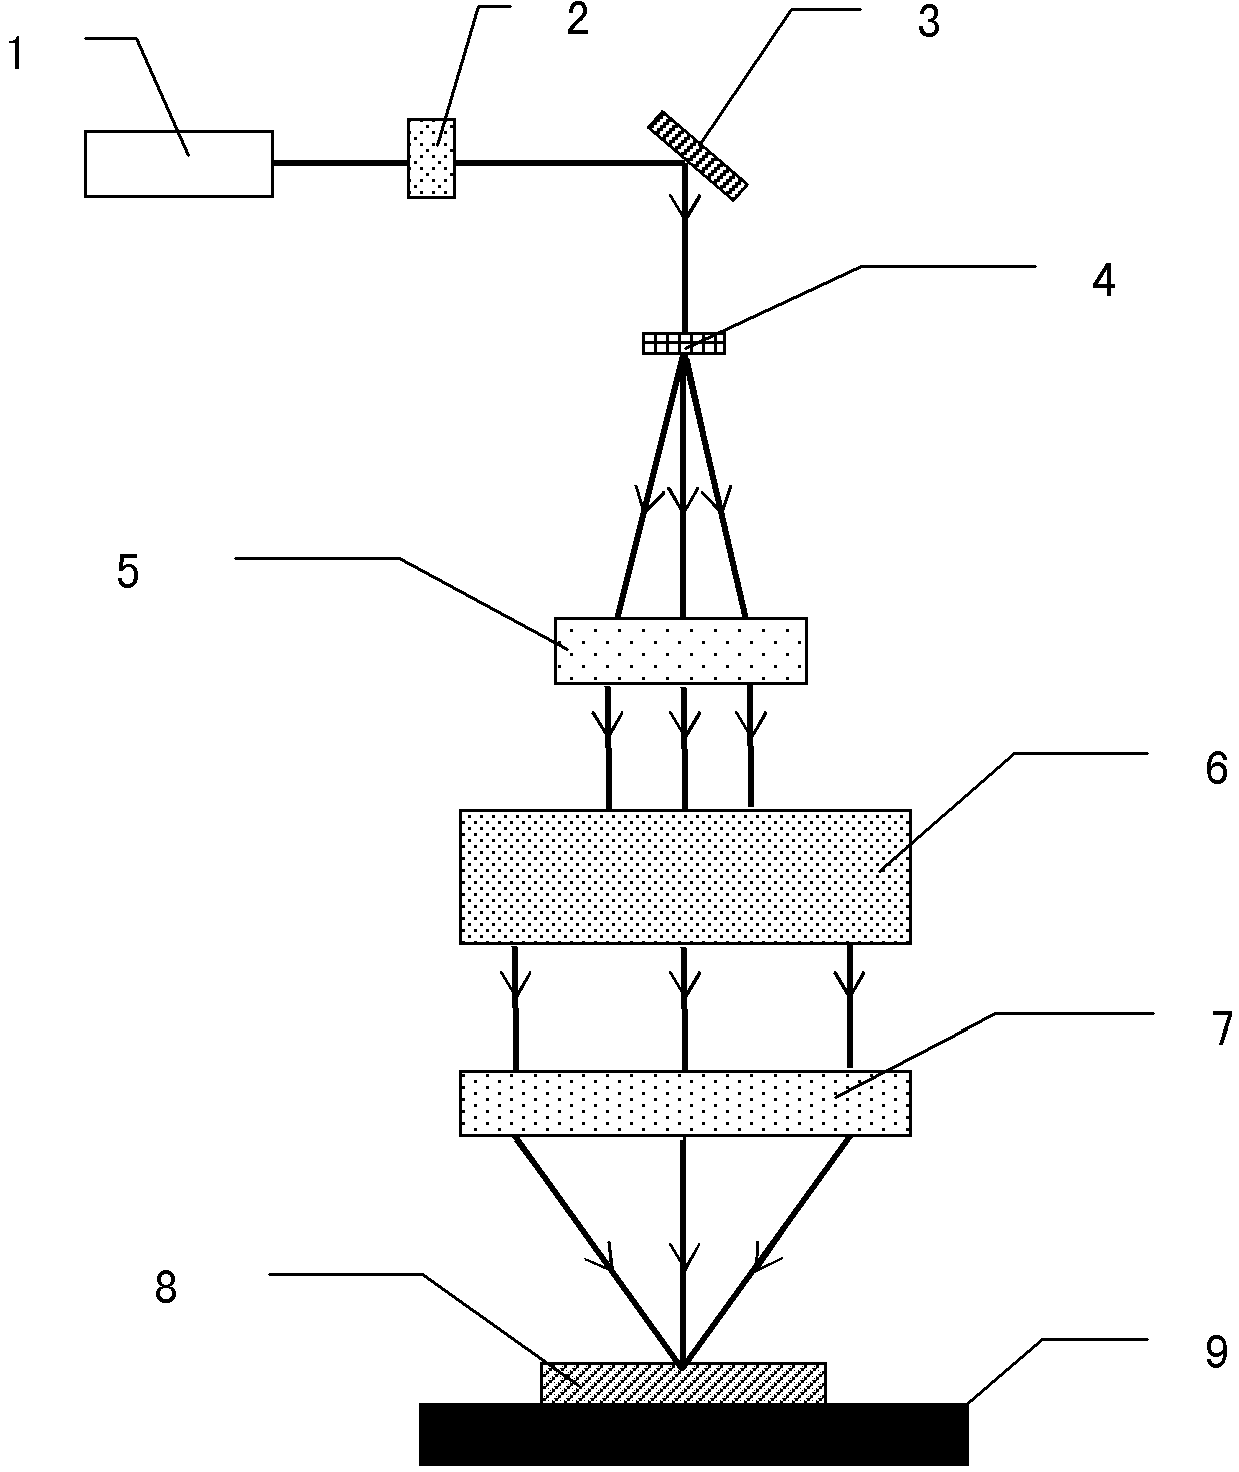 Variable-cycle multi-beam interference photoetching method